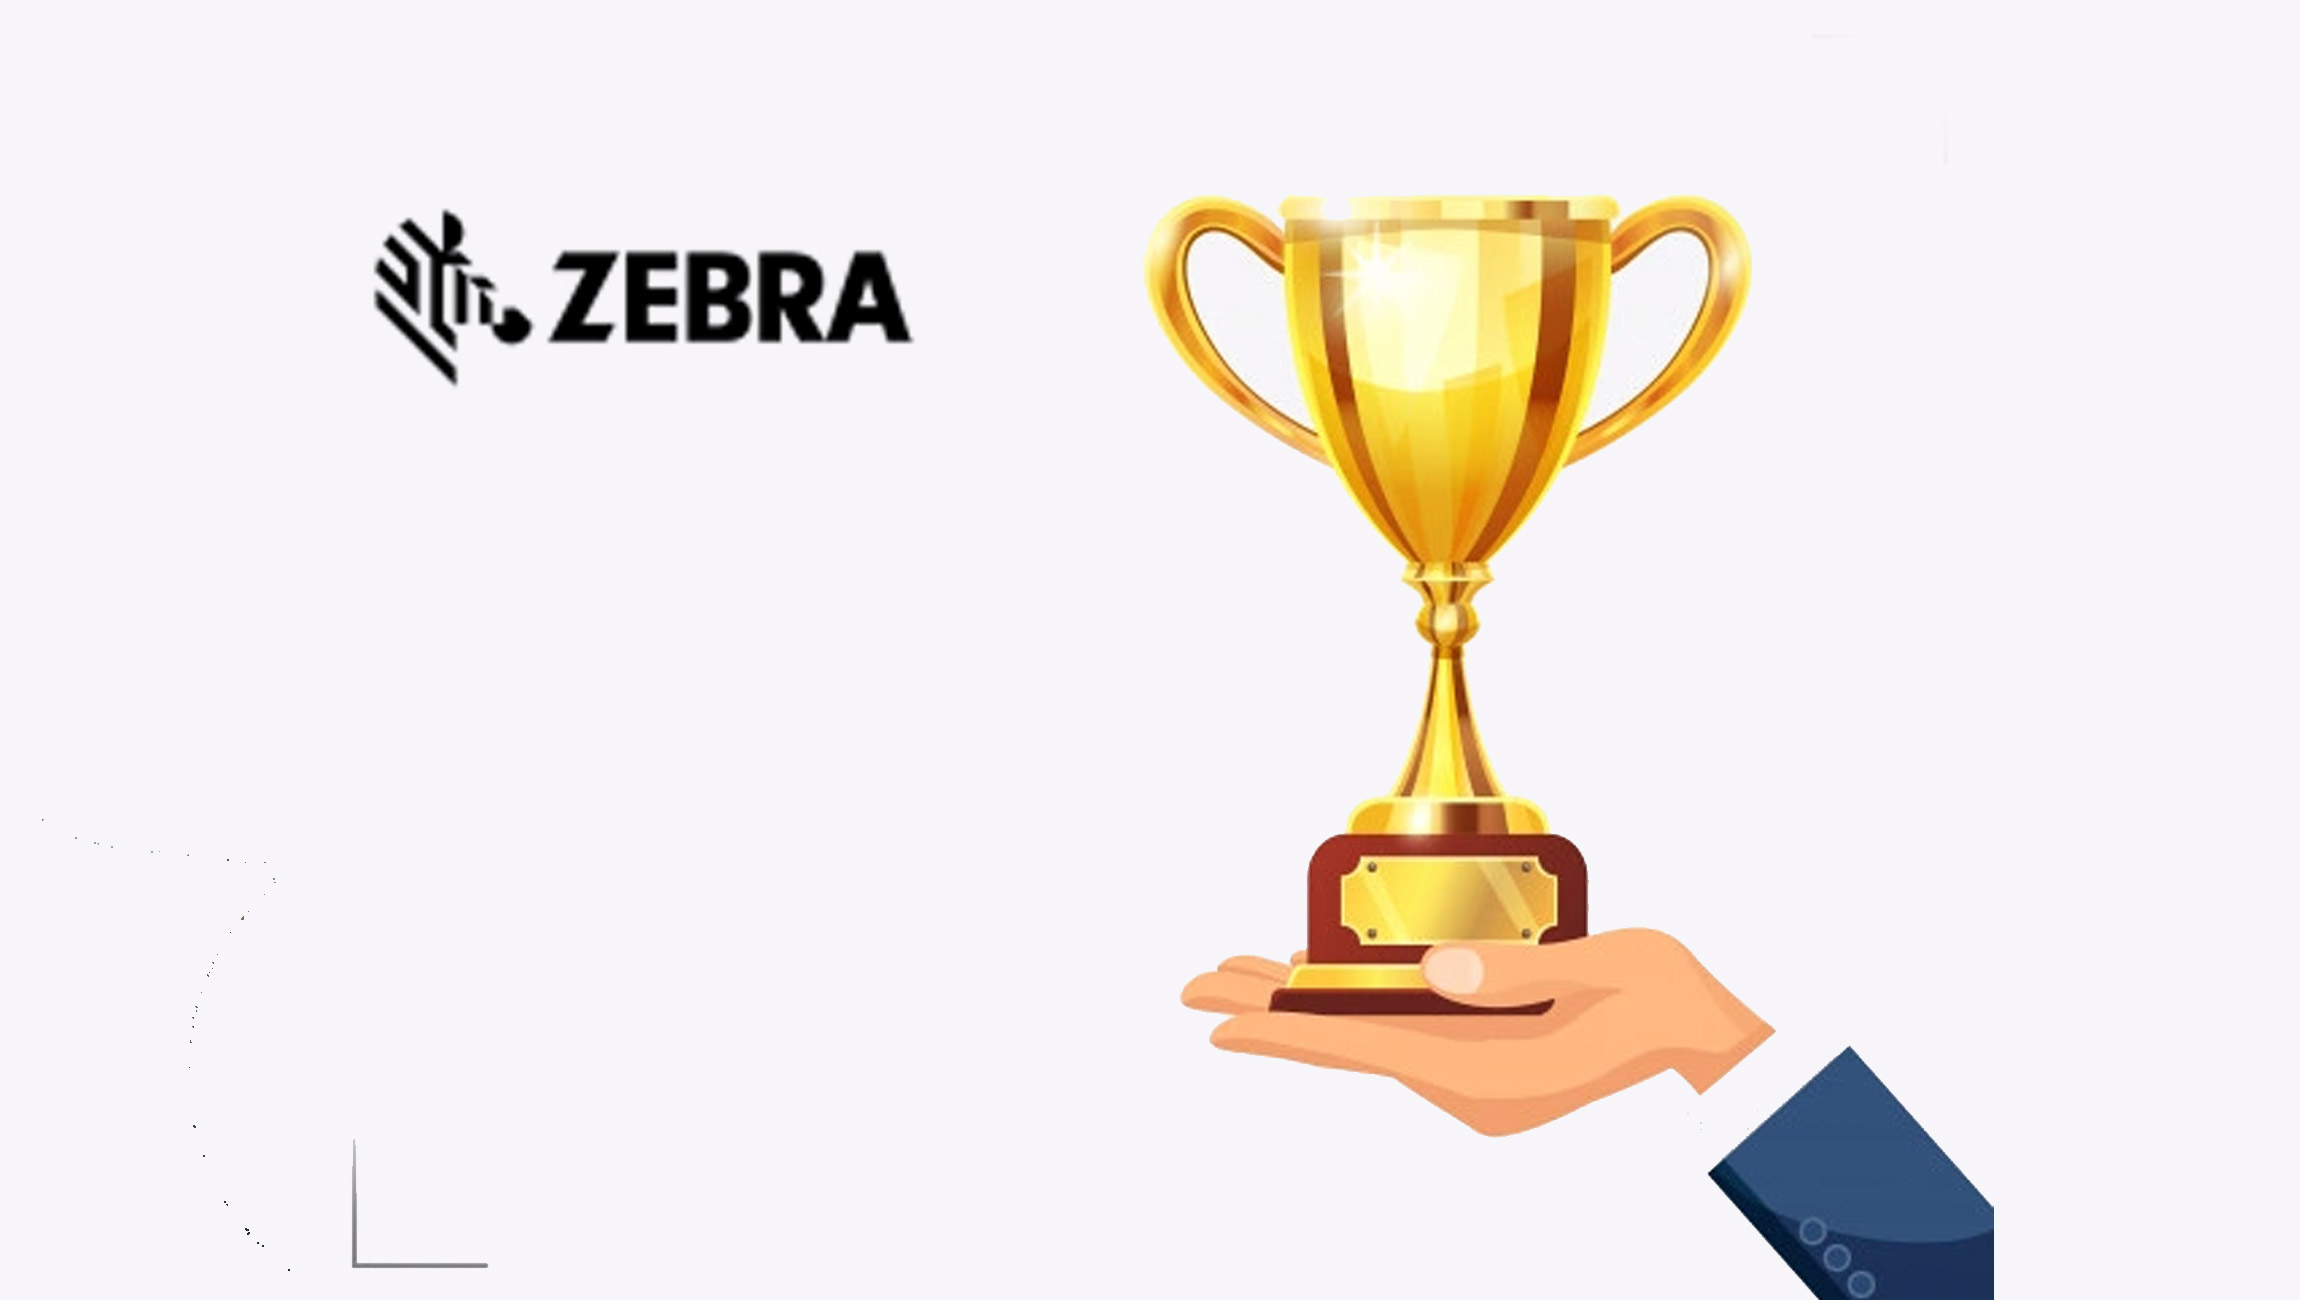 CRN Honors Zebra Technologies With 5-Star Rating in 2022 Partner Program Guide